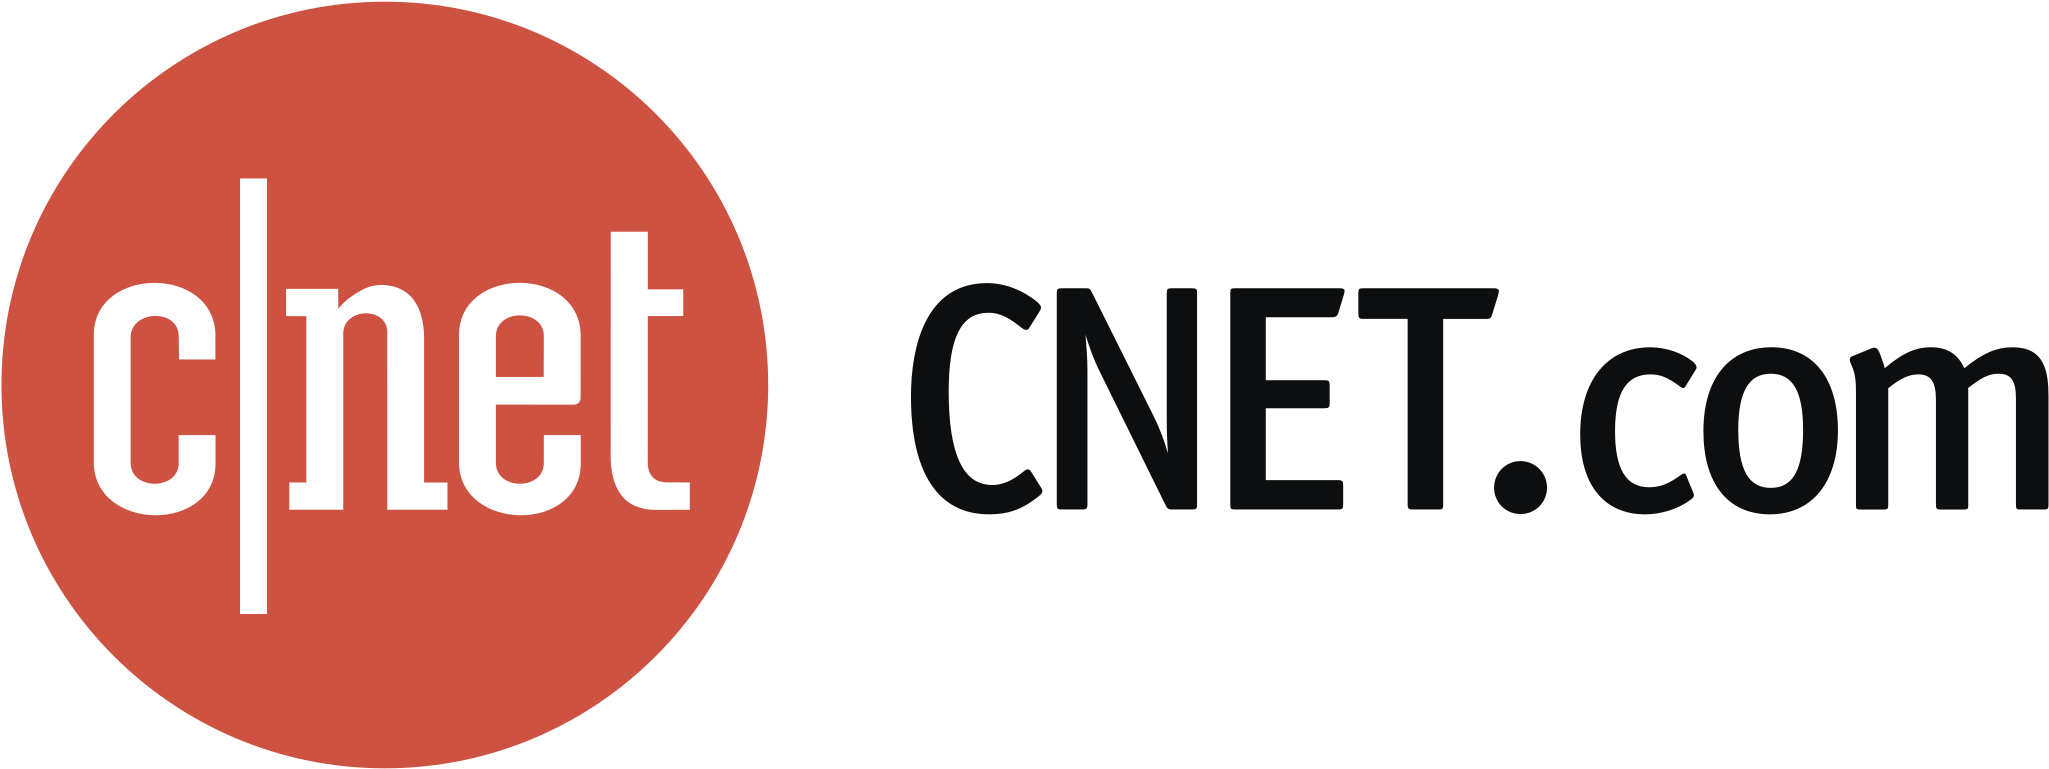 download cnet com logo png transparent - magazine.store cnet magazine (4 issues) png image with no background - pngkey.com